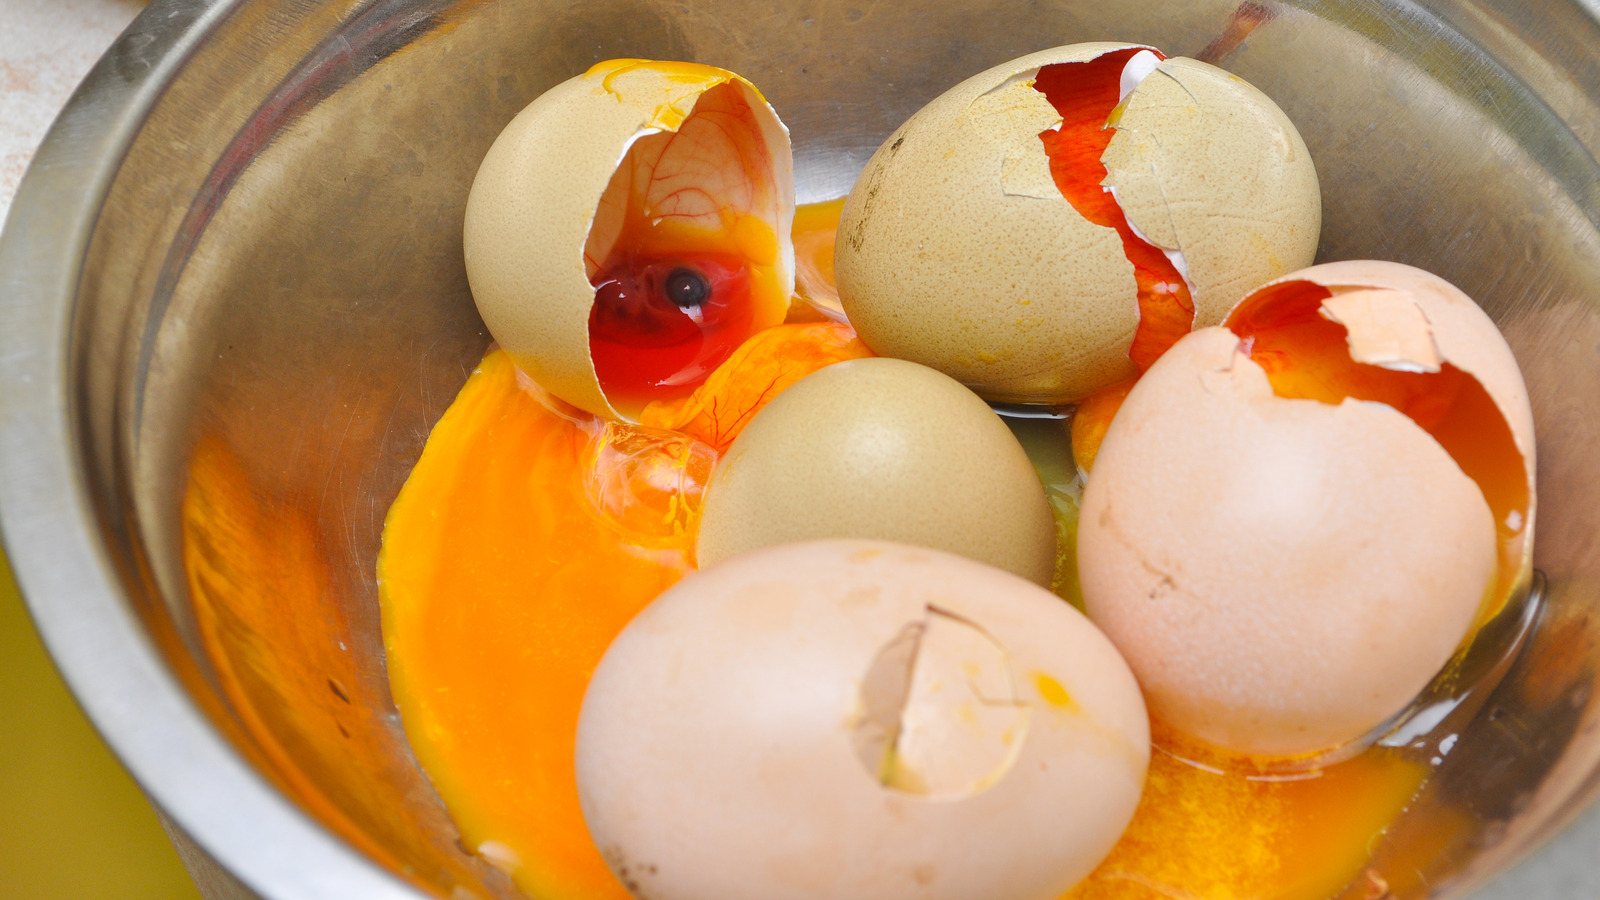 CAN expired eggs make you sick?